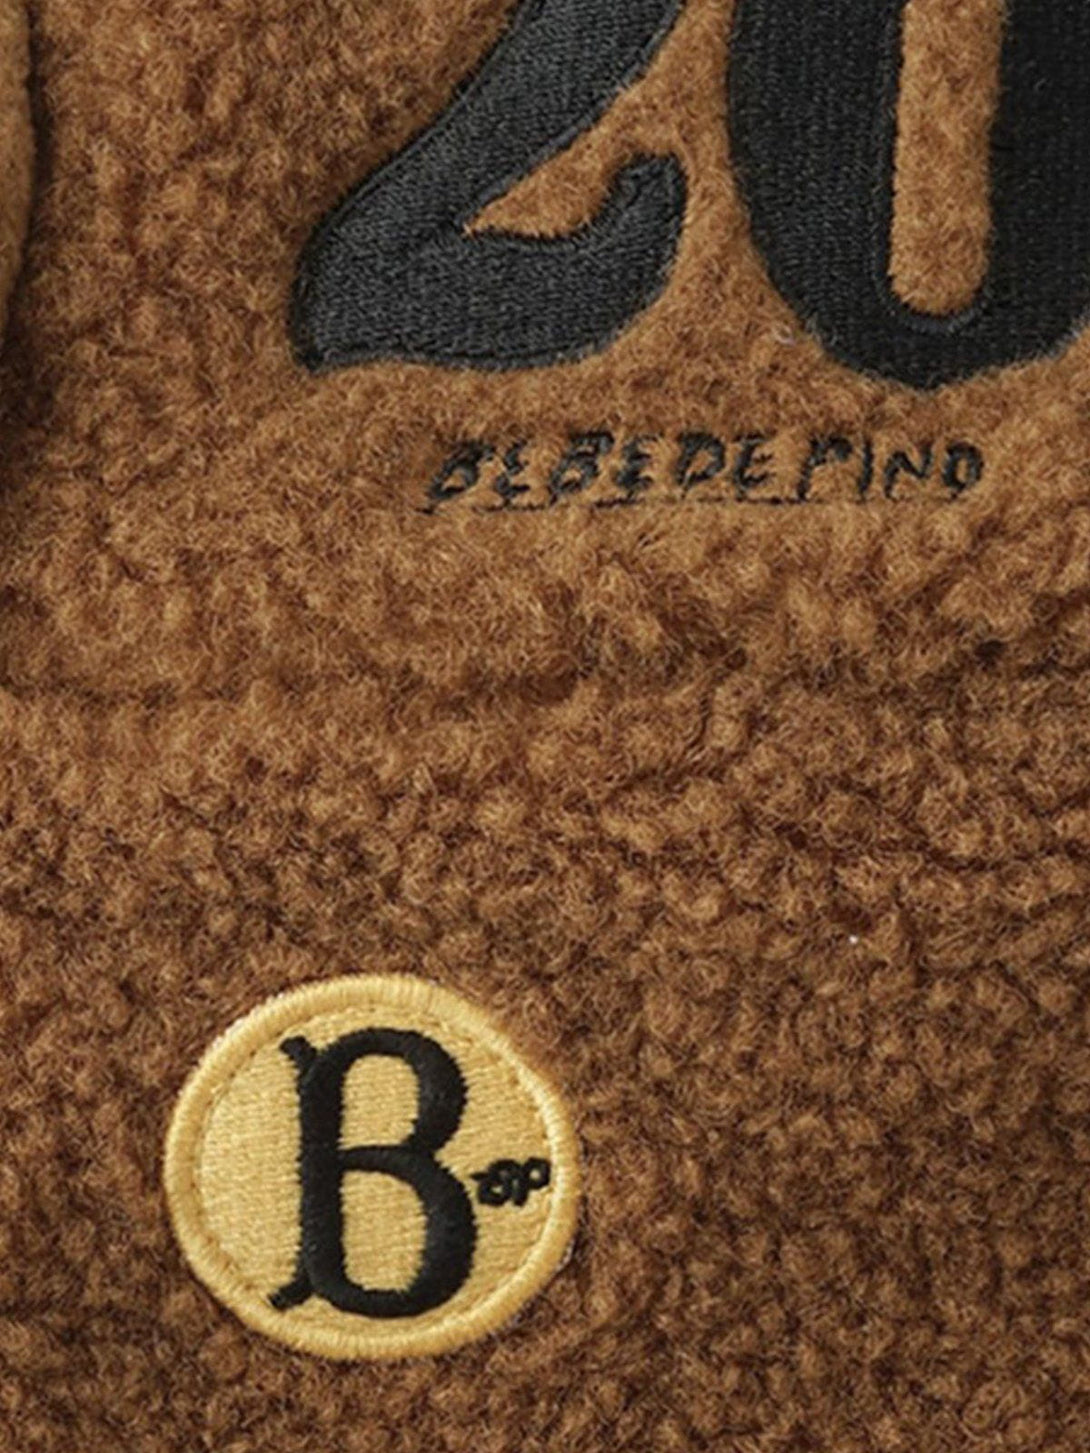 Number 20 Embroidered Sherpa Hat AlanBalen